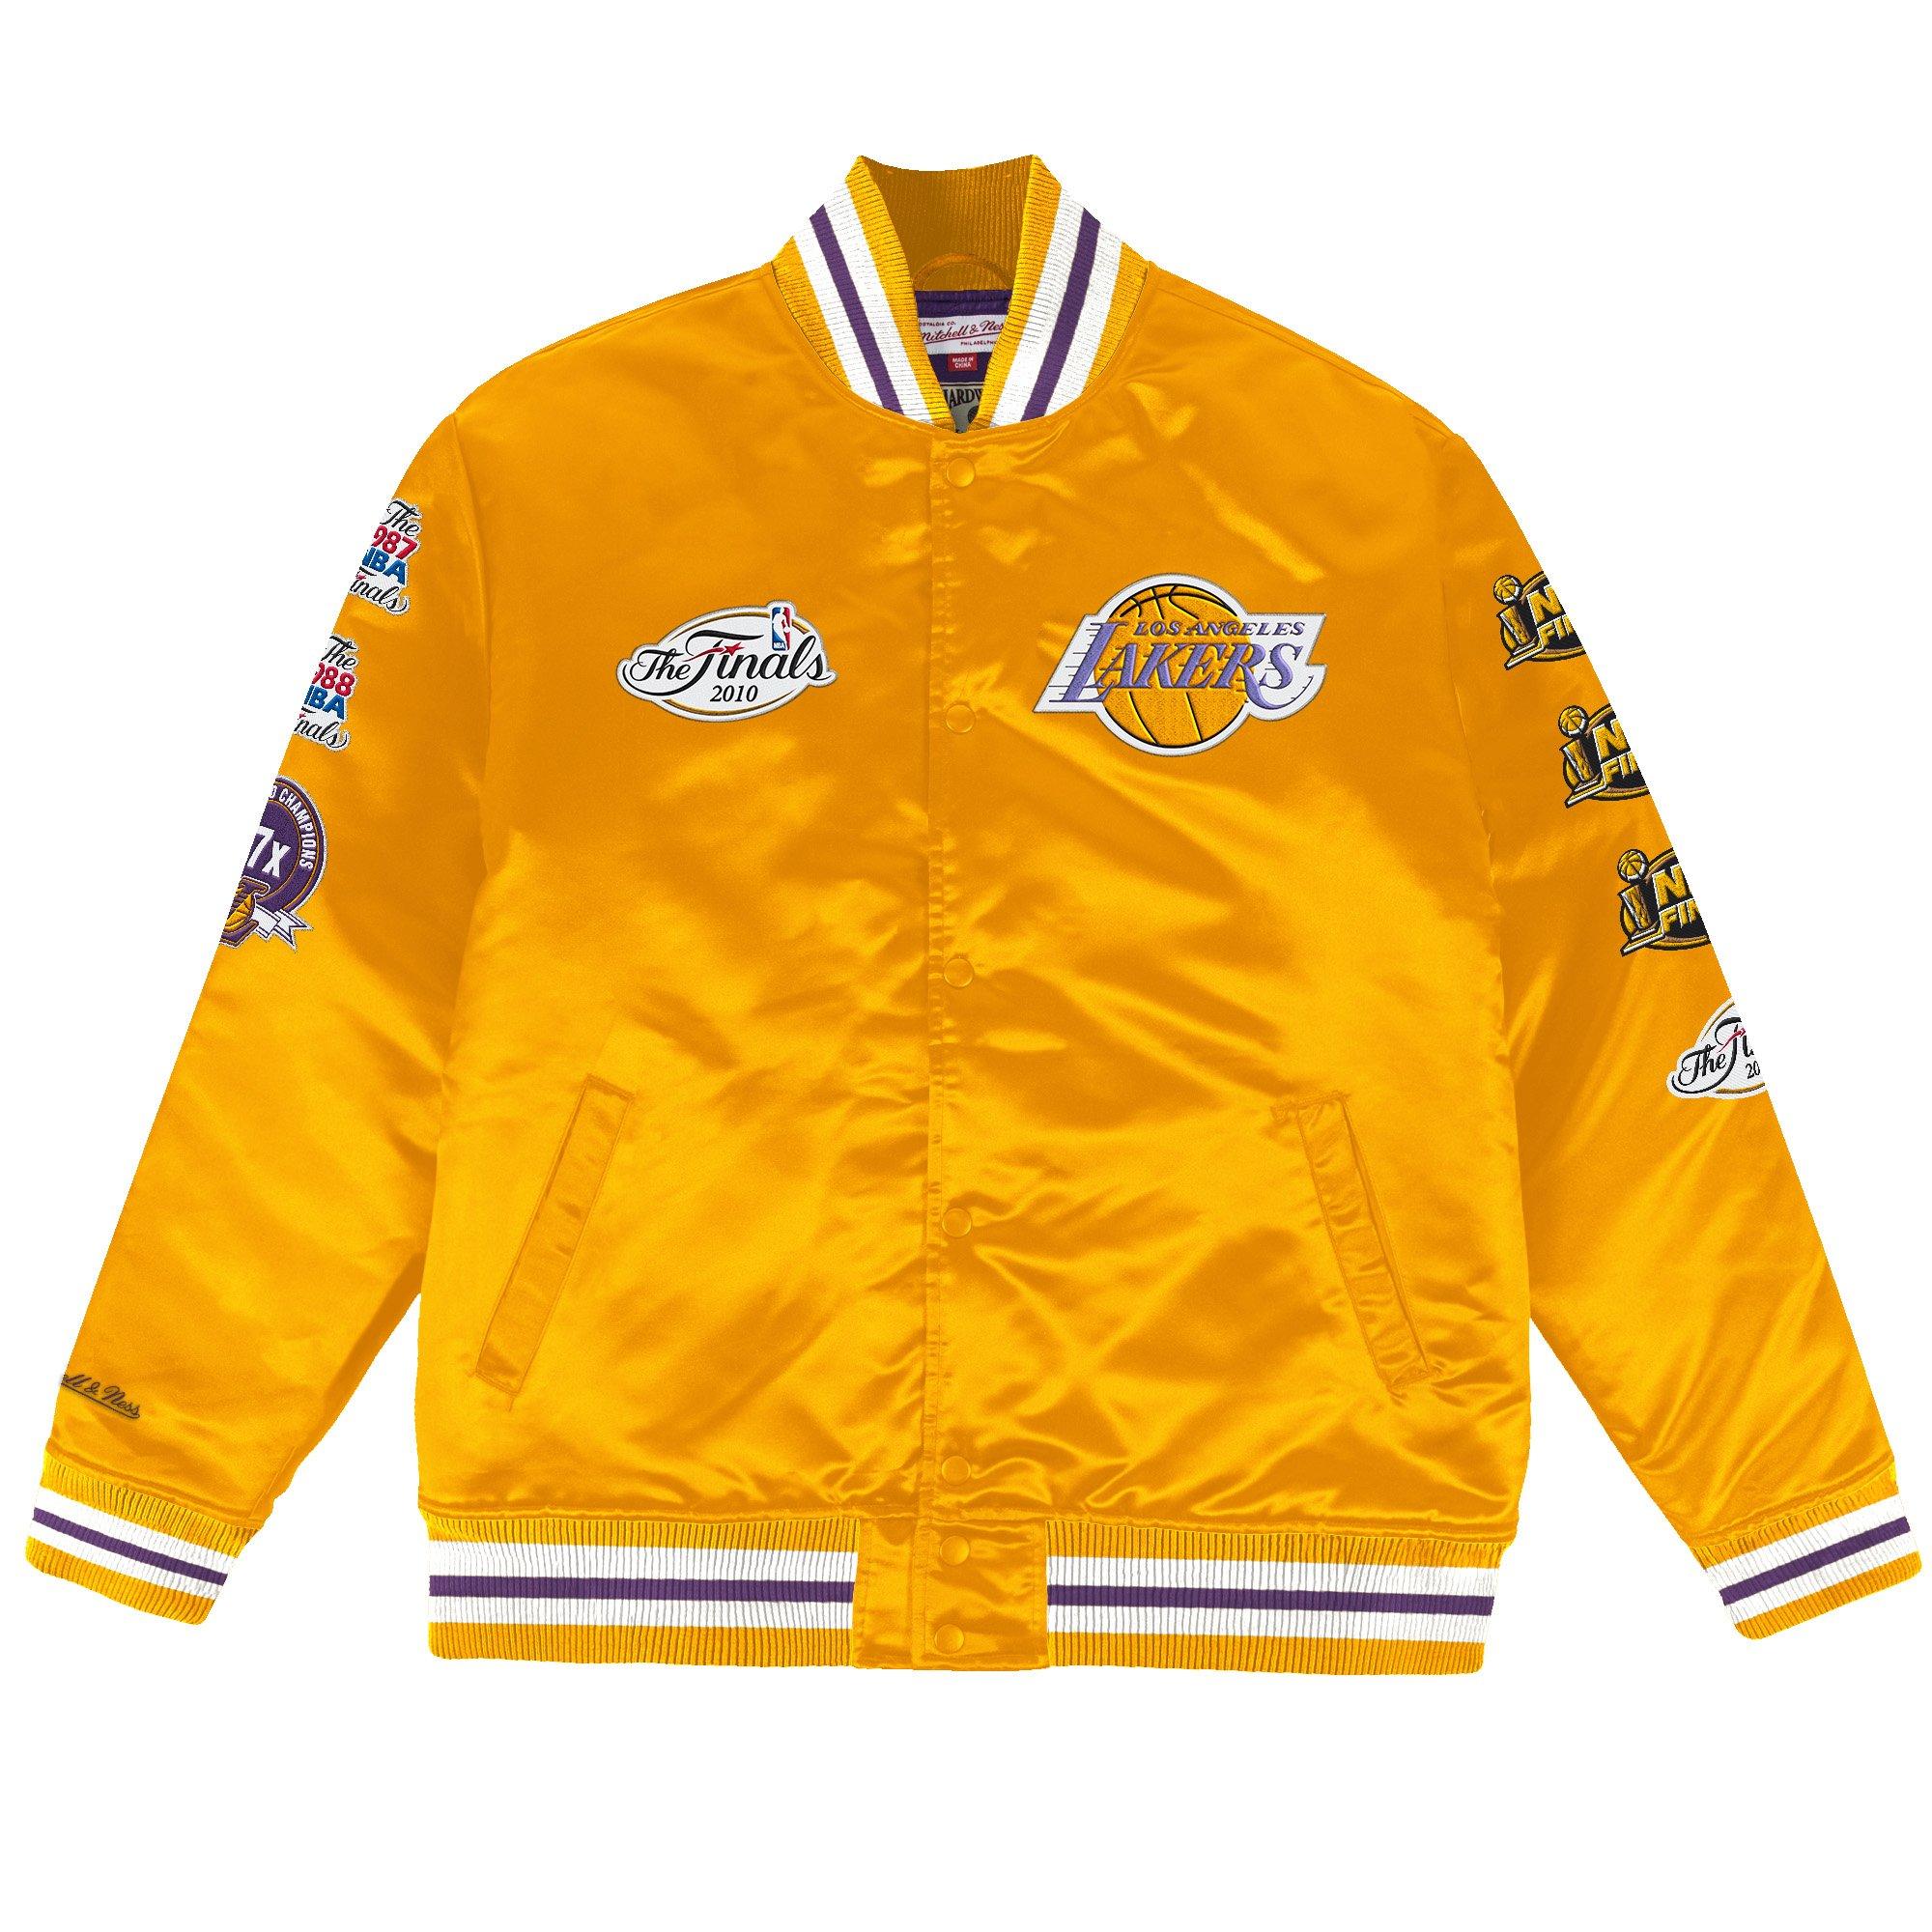 Champion lakers bomber jacket , it is displayed as